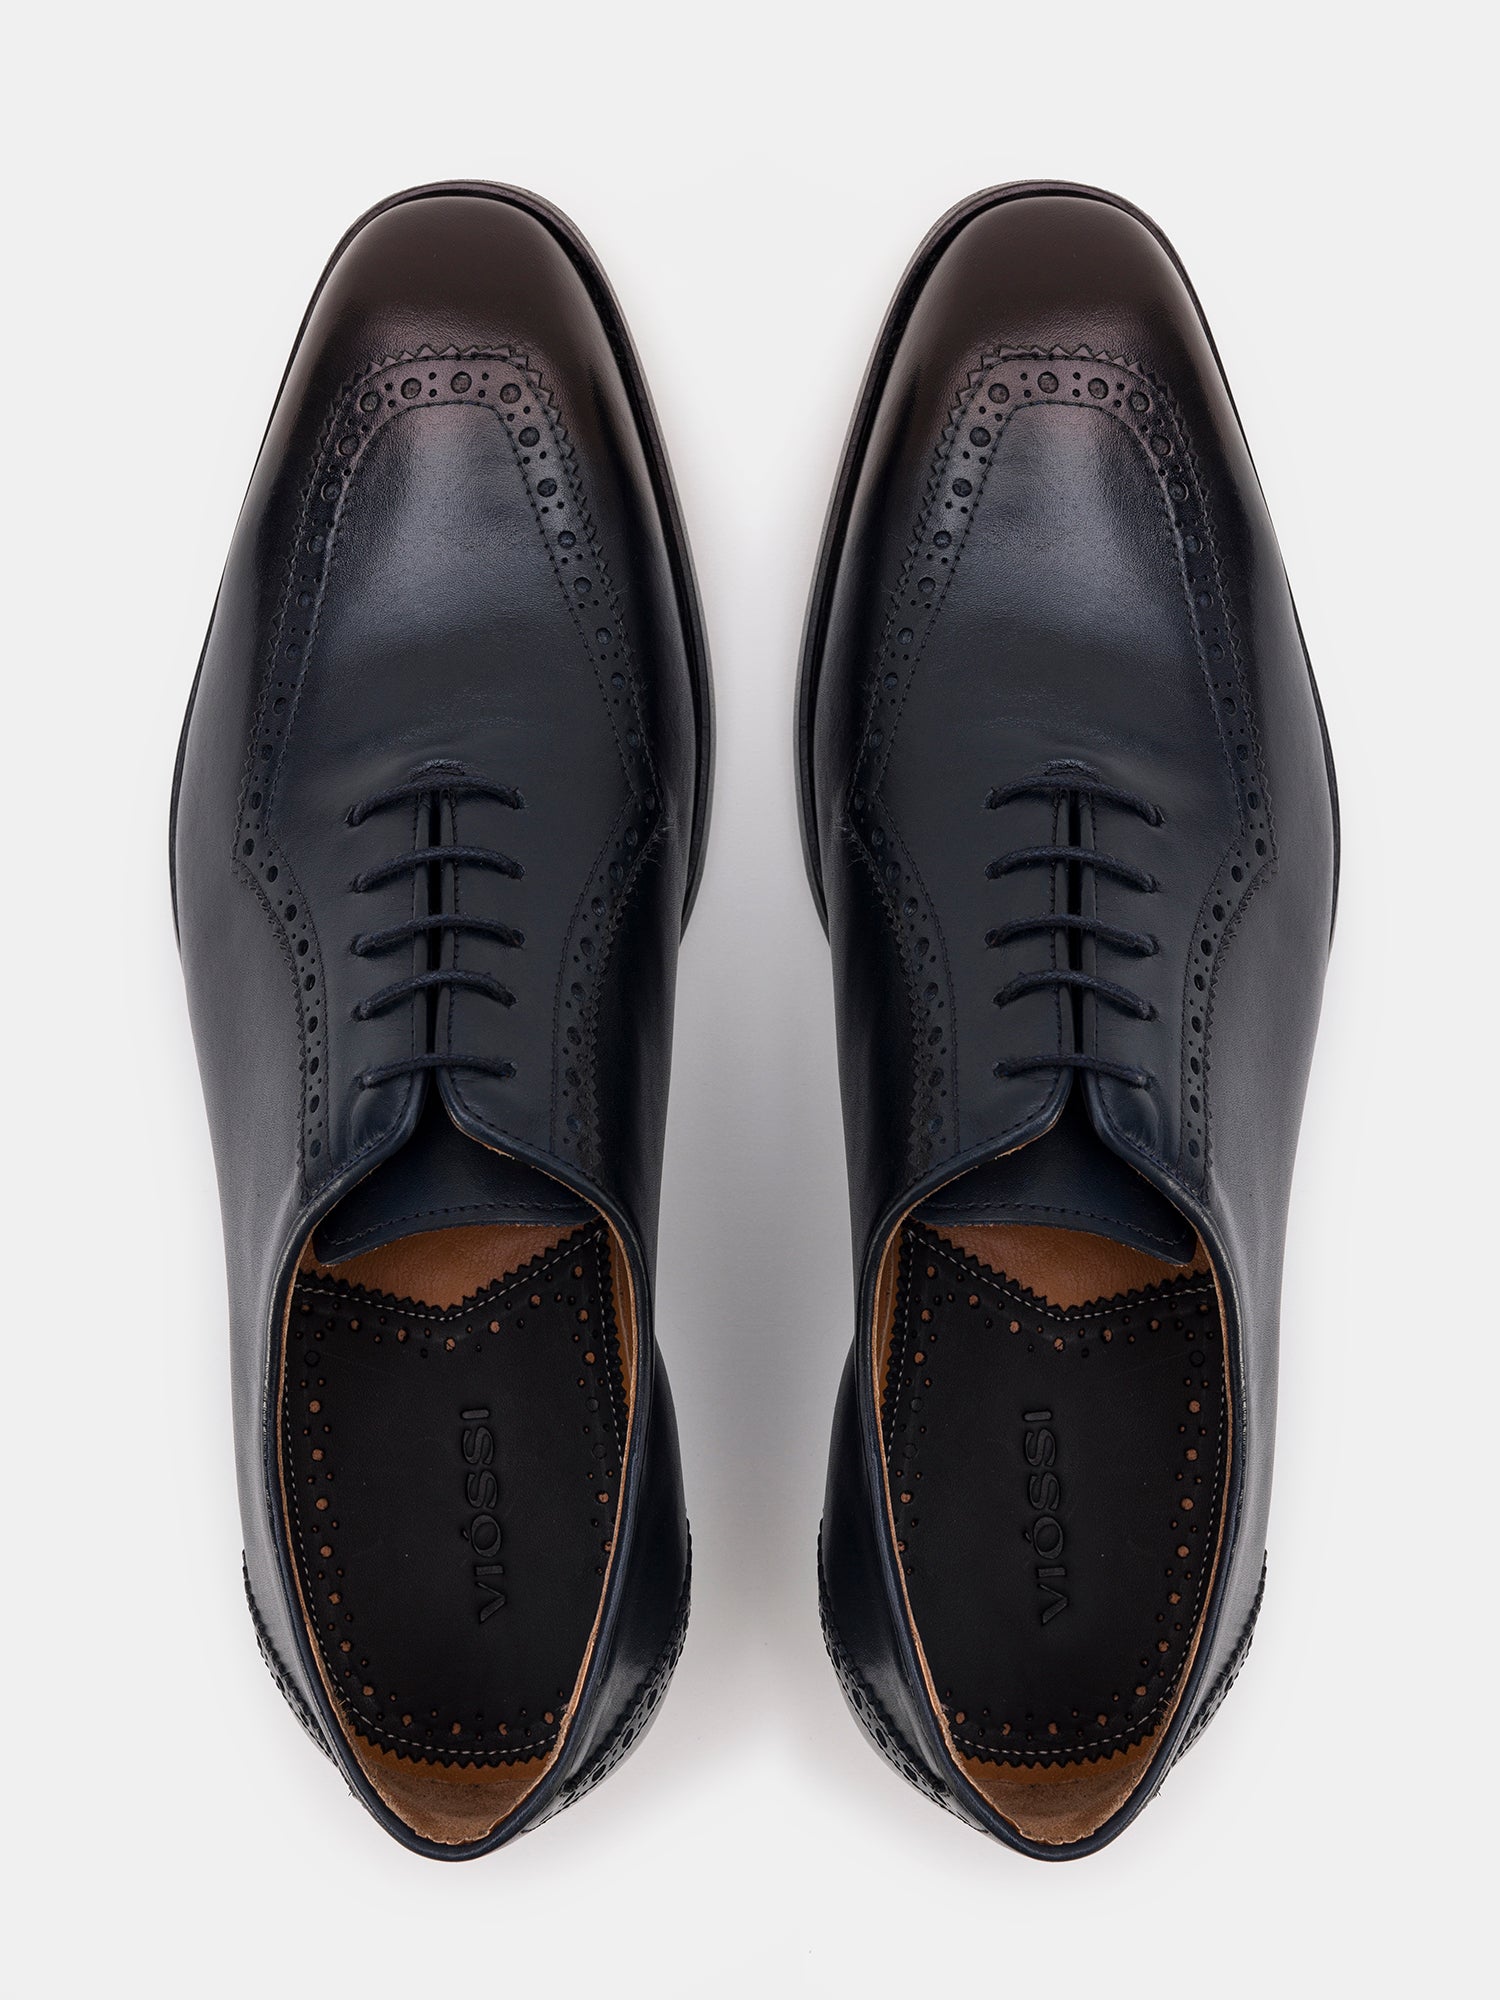 Navy Leather Wing Tip Oxford